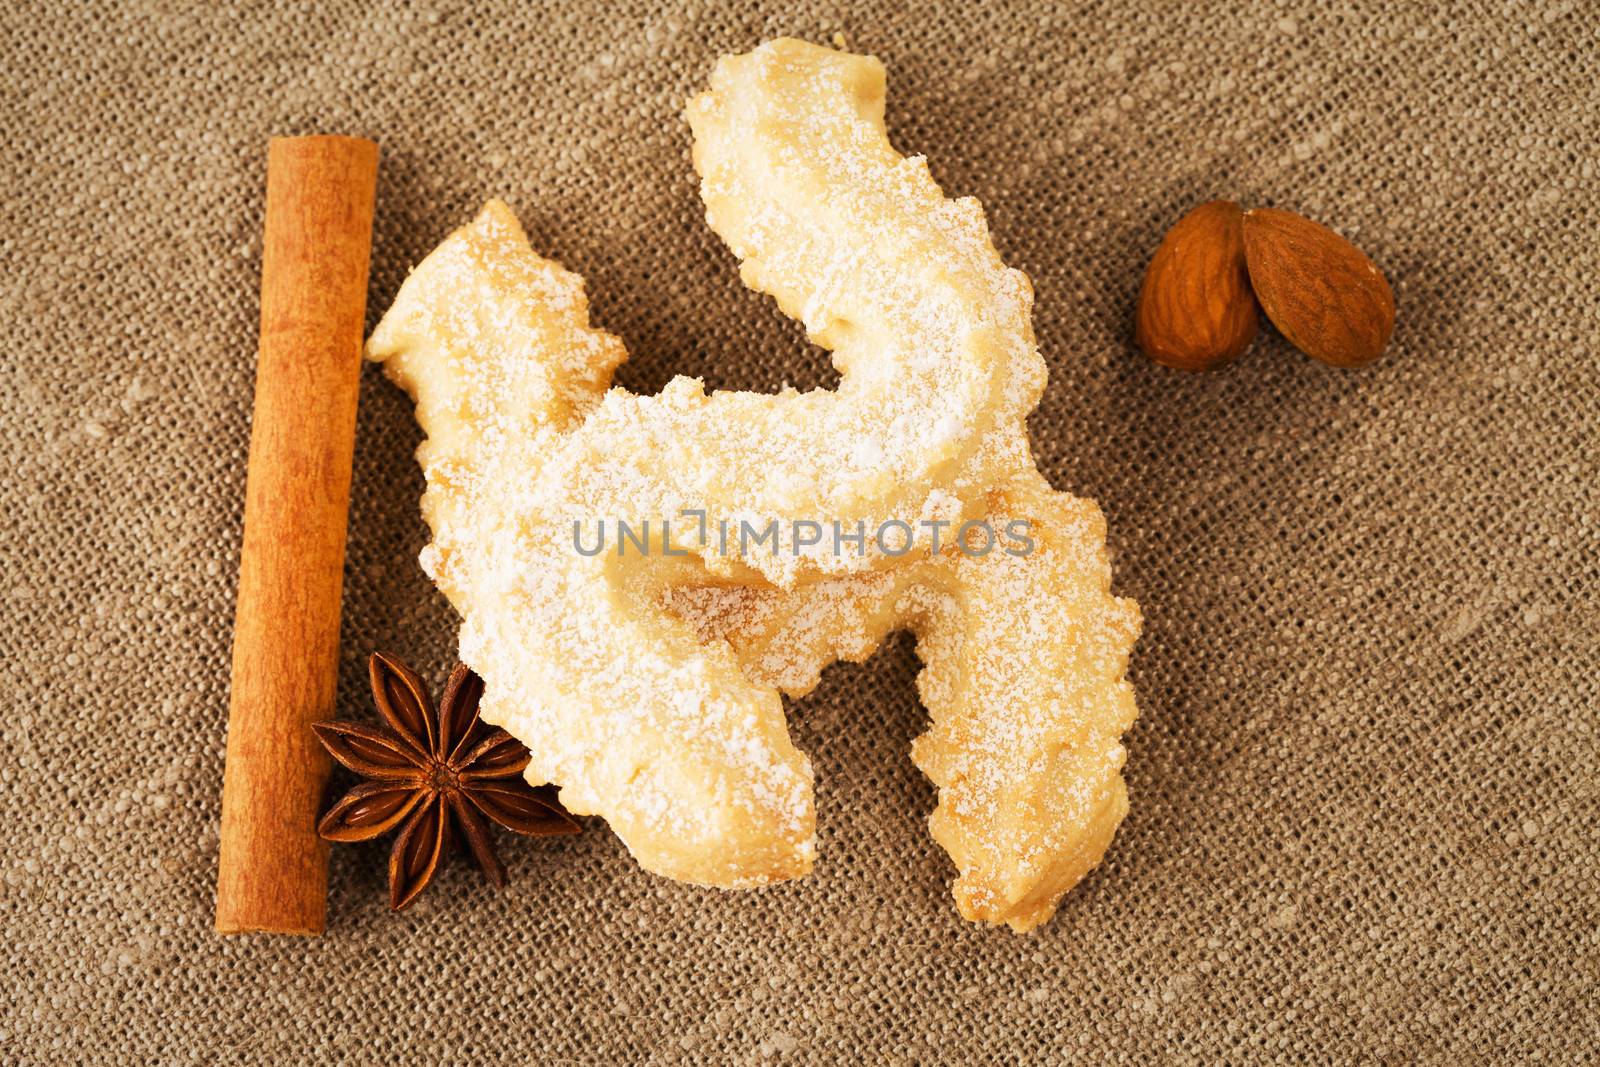 butter cookies with anise, cinnamon sticks and almonds from top on a fabric